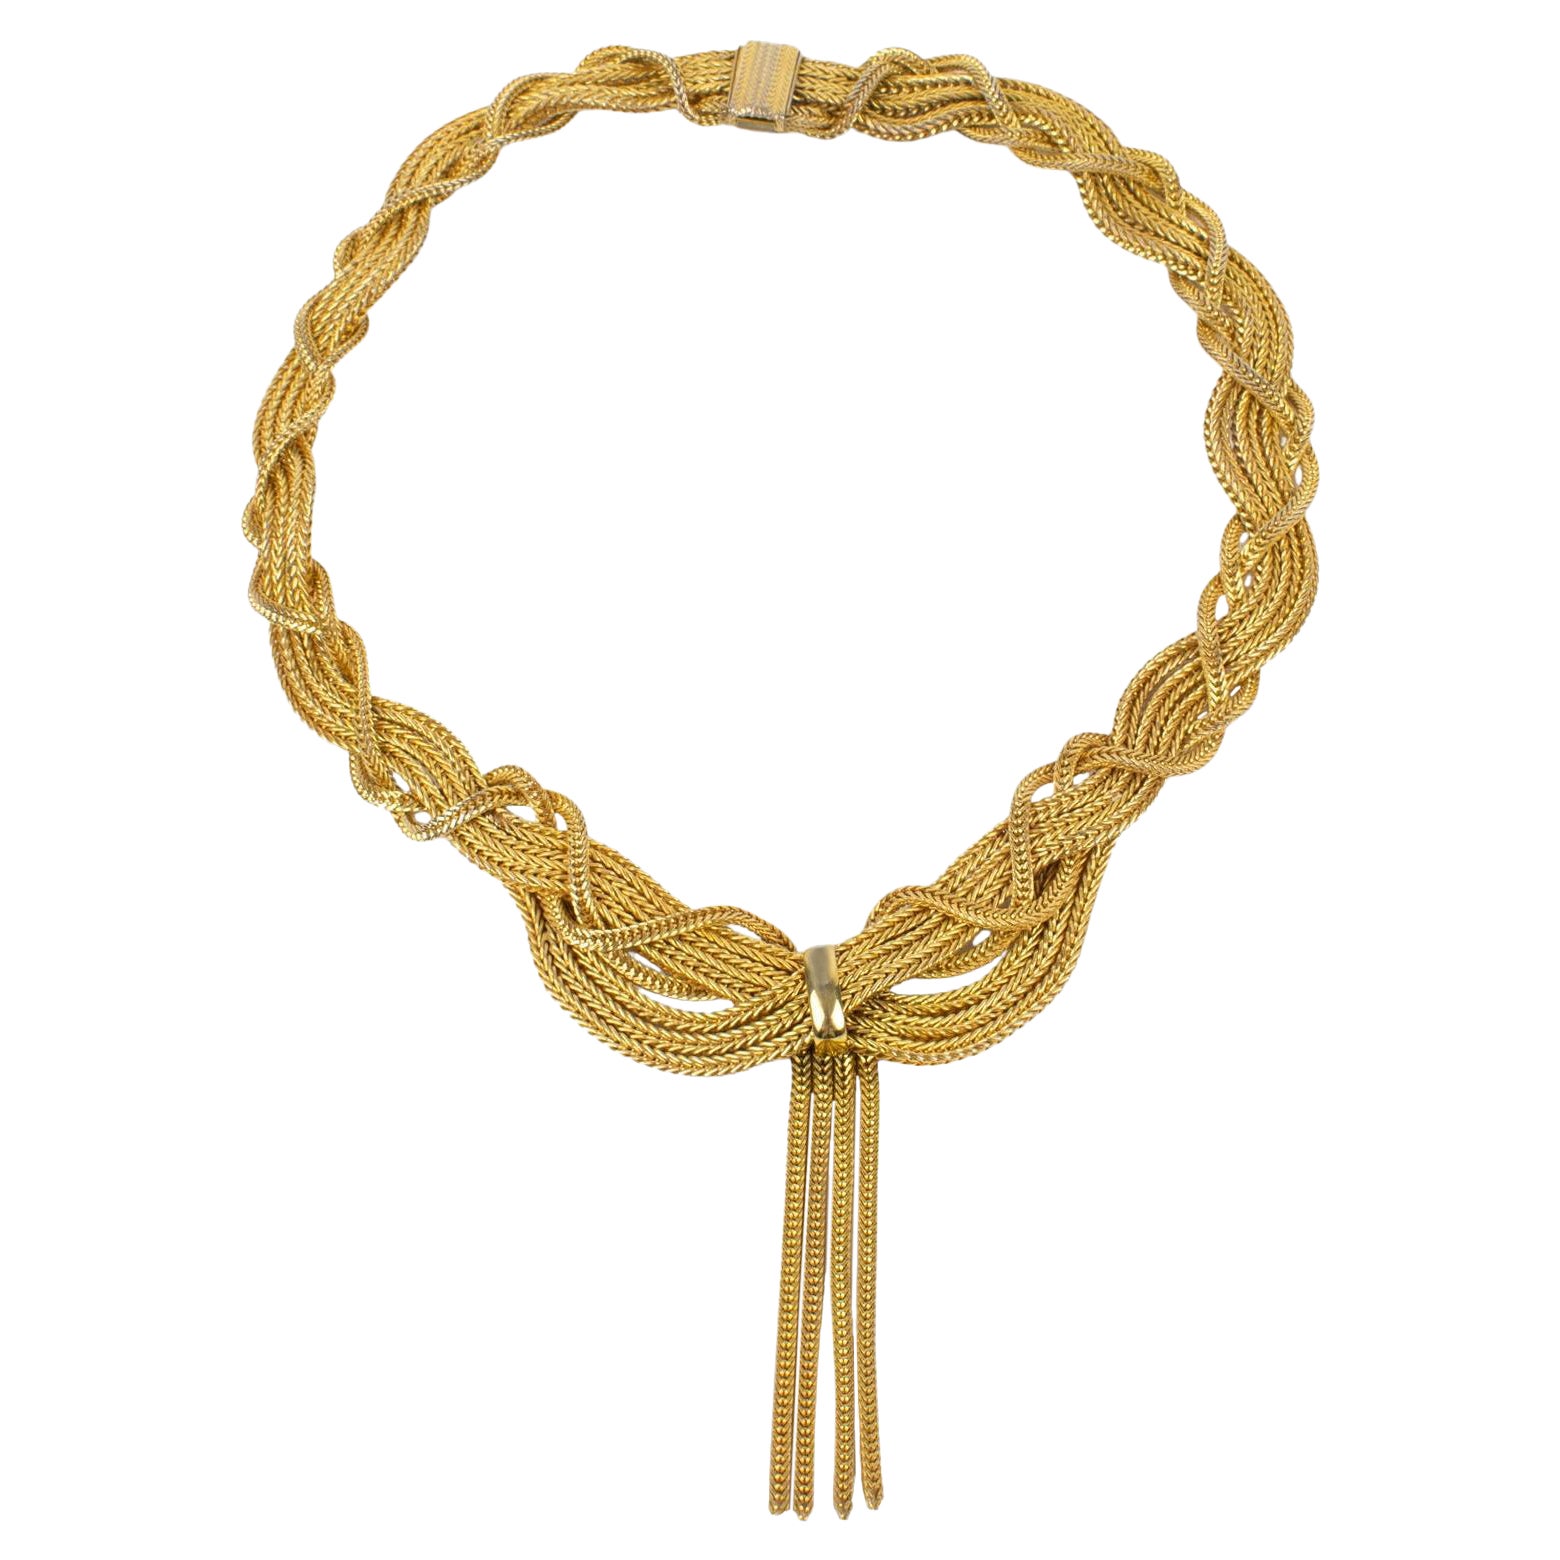 Christian Dior by Grosse 1958 Gilded Metal Braided Choker Necklace